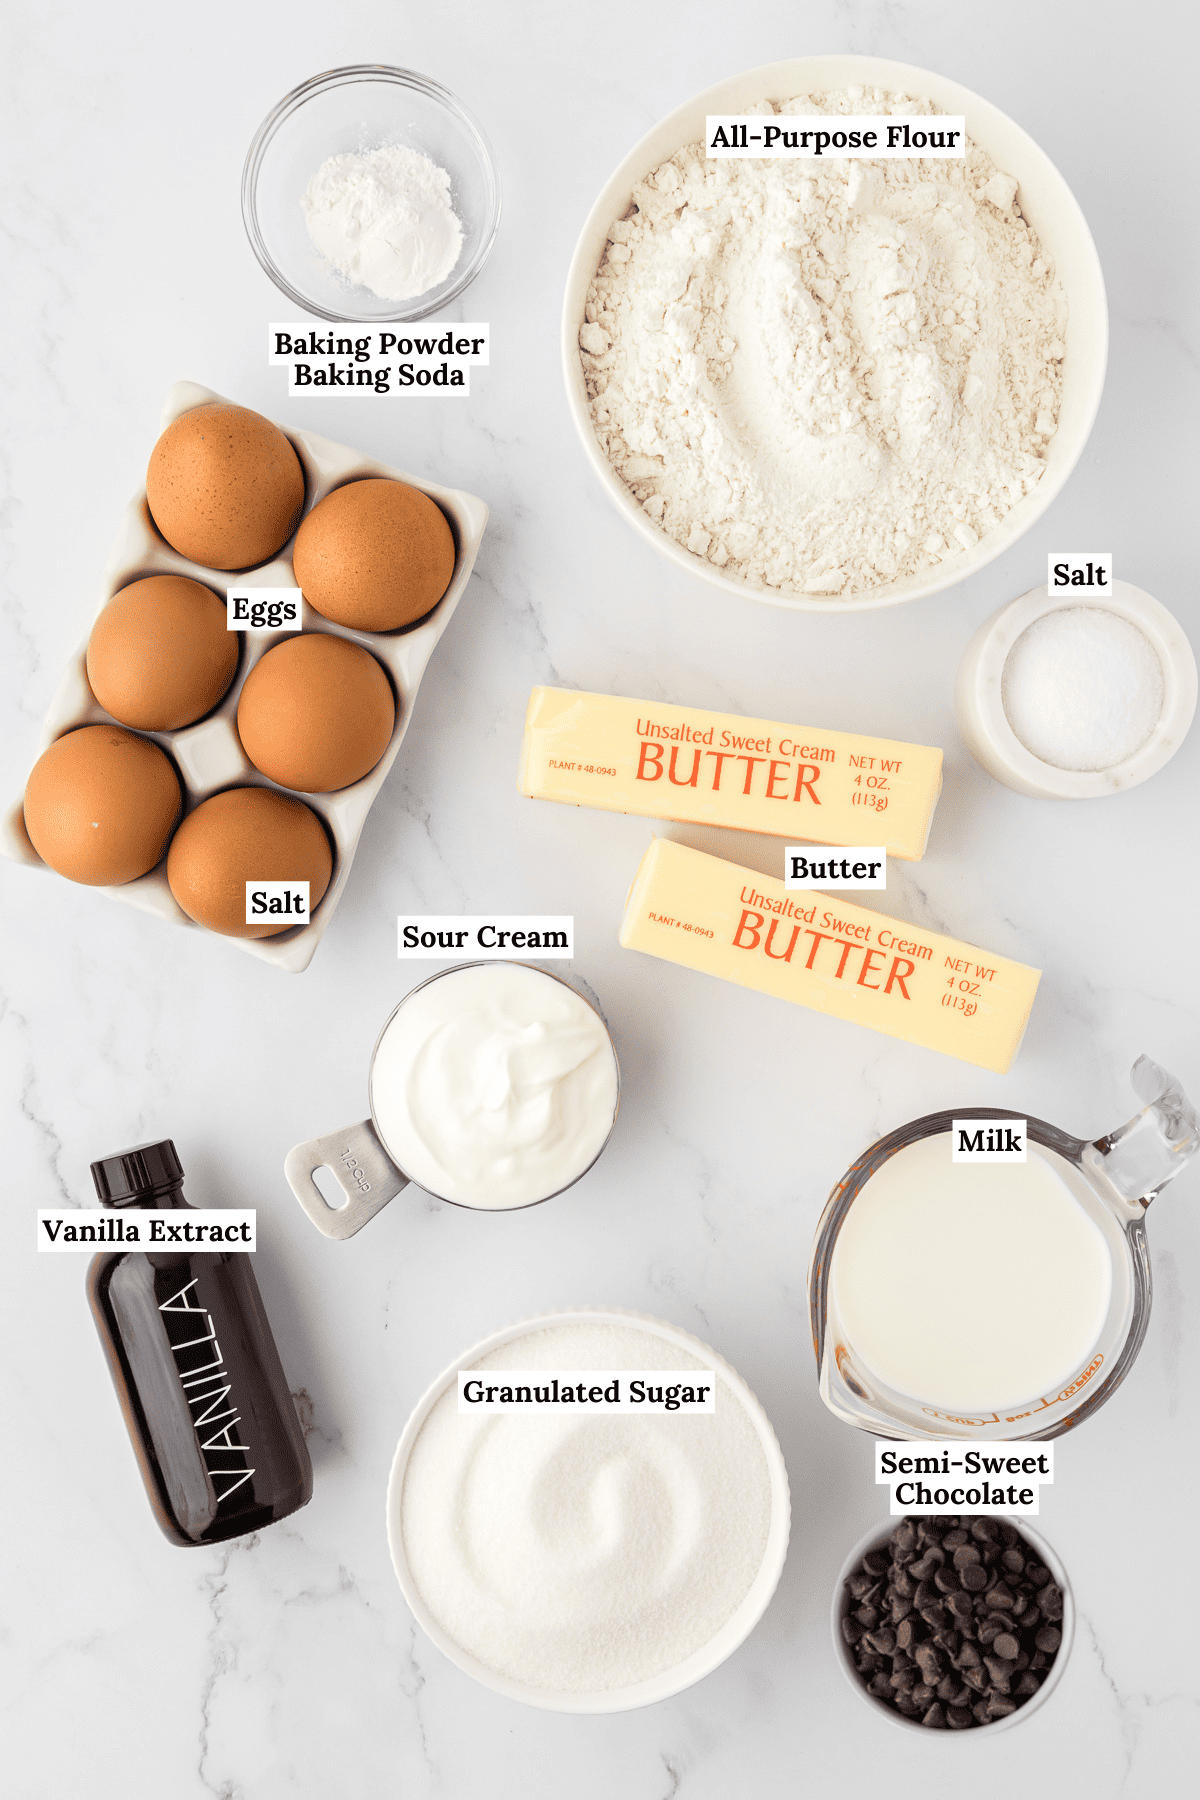 overhead view of the ingredients for marble cake including baking powder, baking soda, all-purpose flour, salt, two sticks of butter, 6 eggs, sour cream, milk, granulated sugar, vanilla extract and semi-sweet chocolate chips